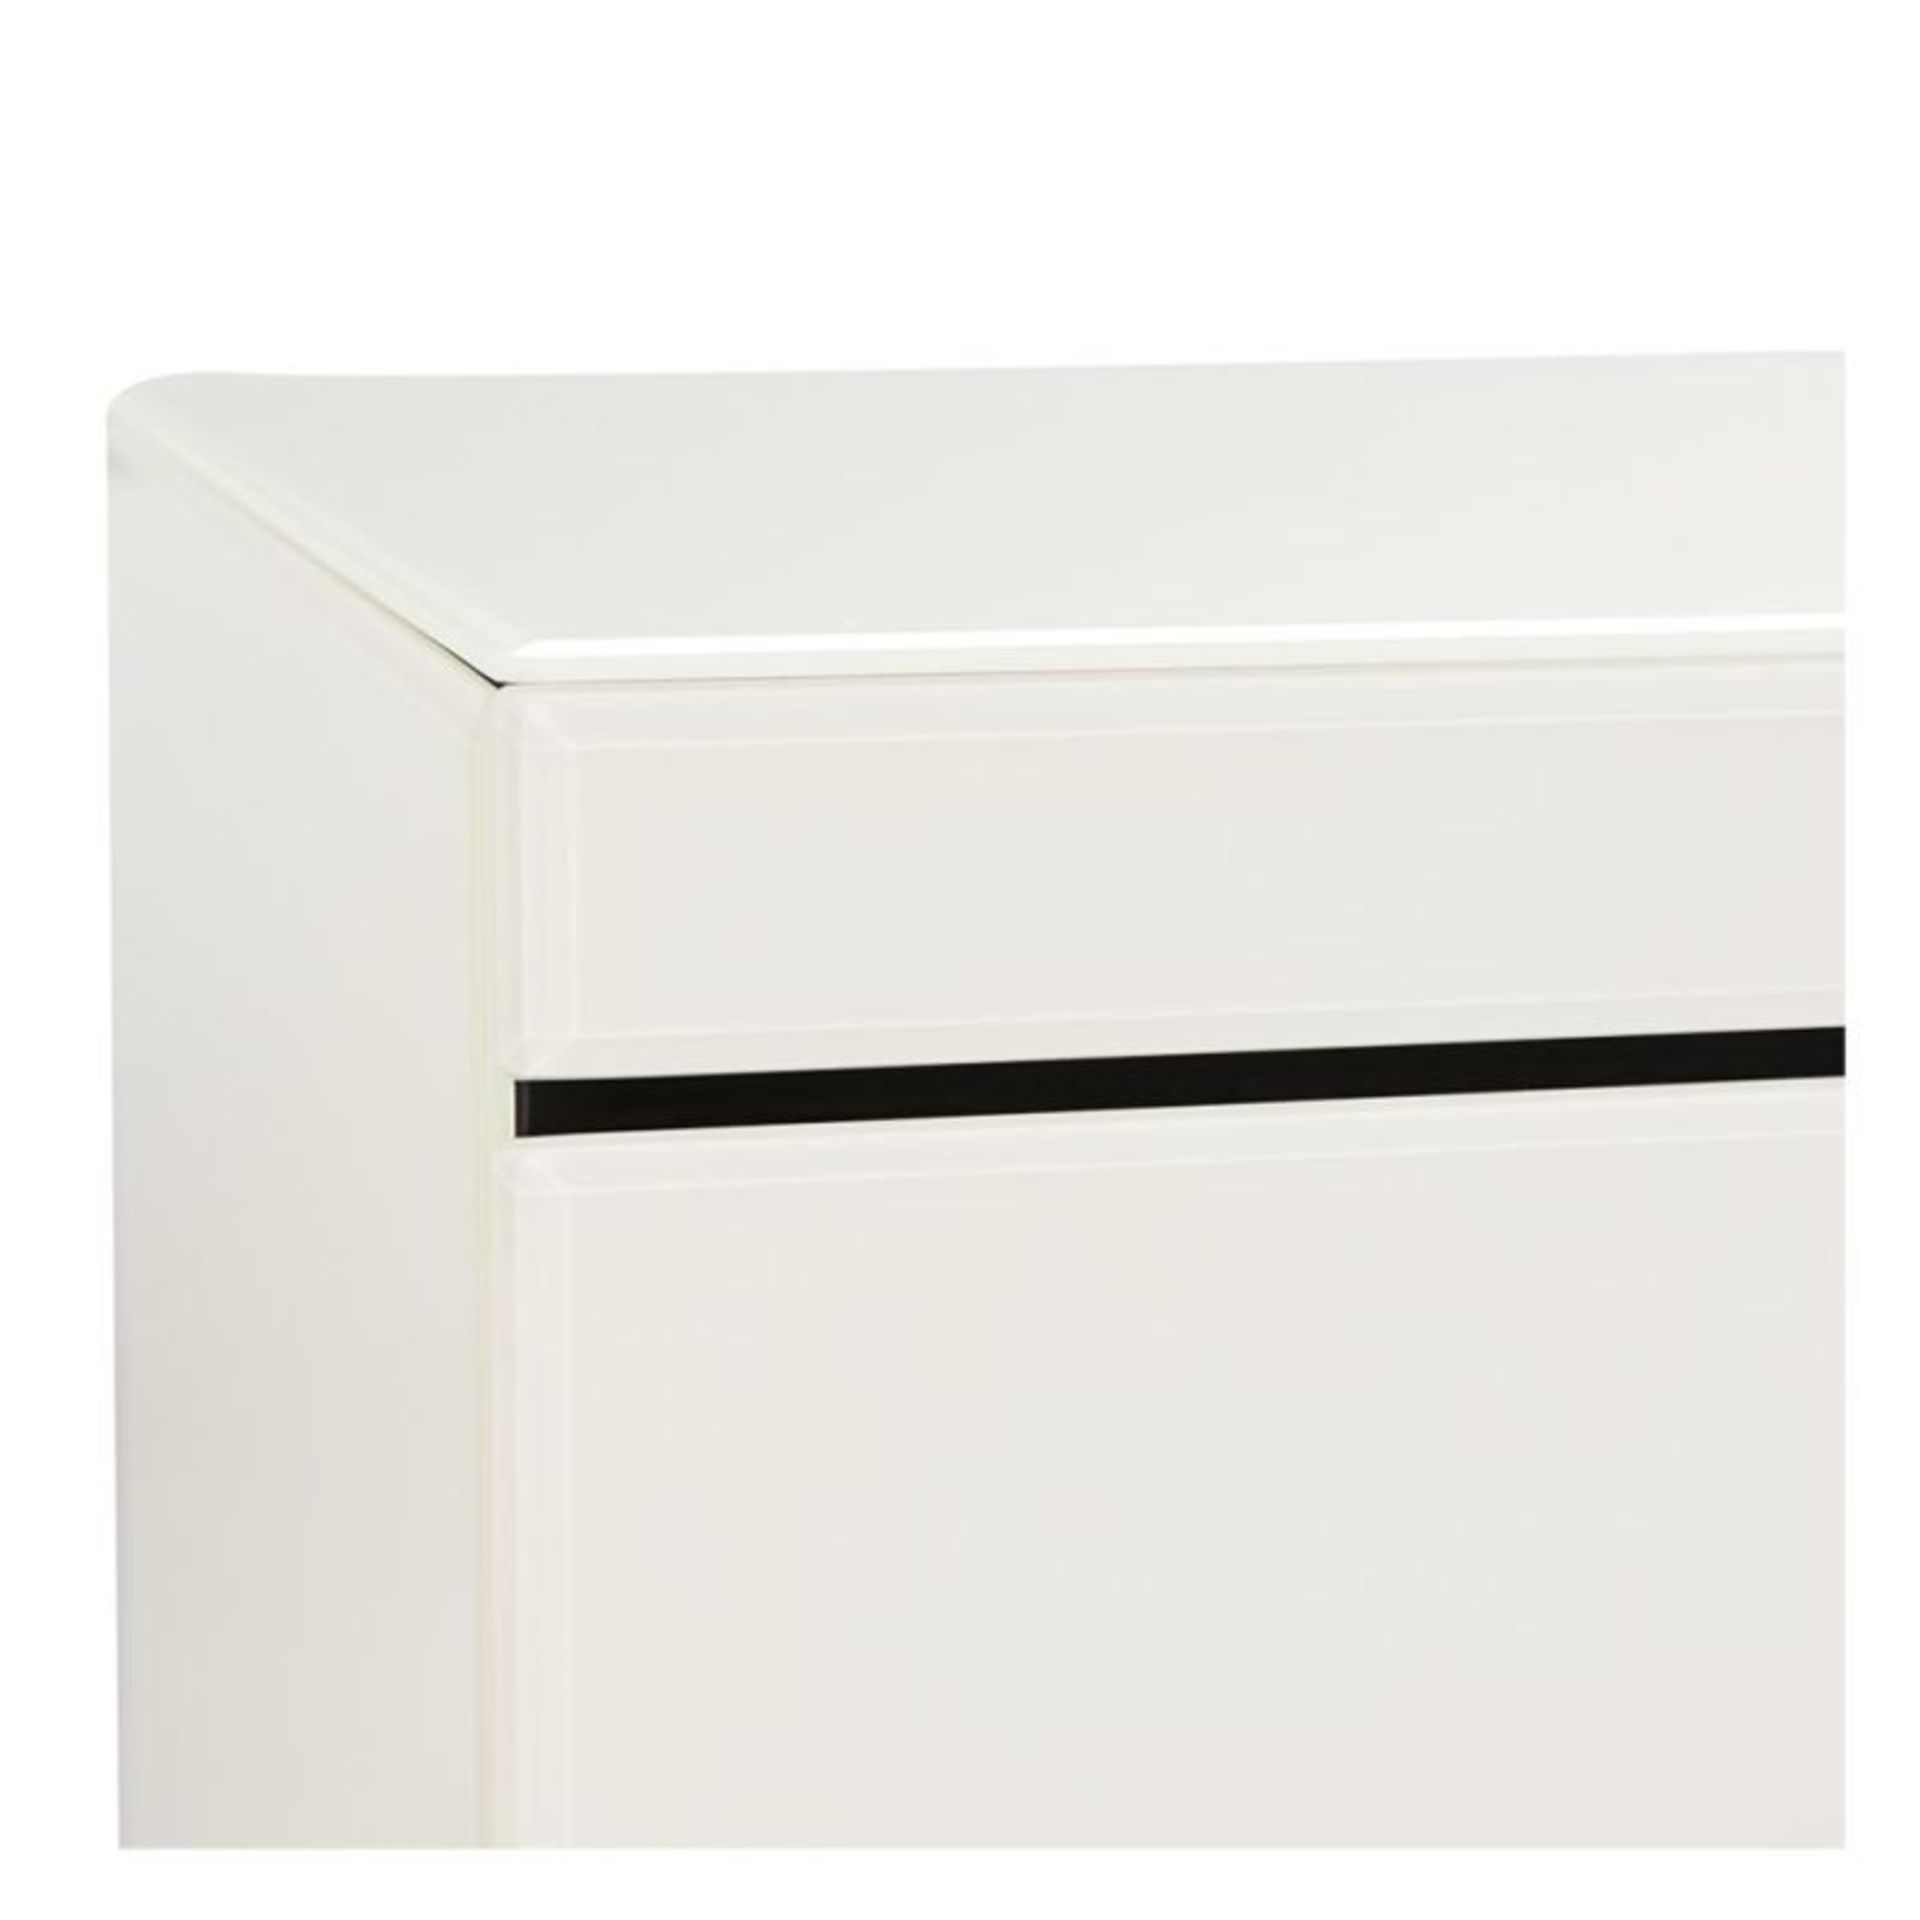 Brand new direct from the manufacturers the shard glass diamond pearl cream 3 + 3 drawer chest, made - Image 2 of 2